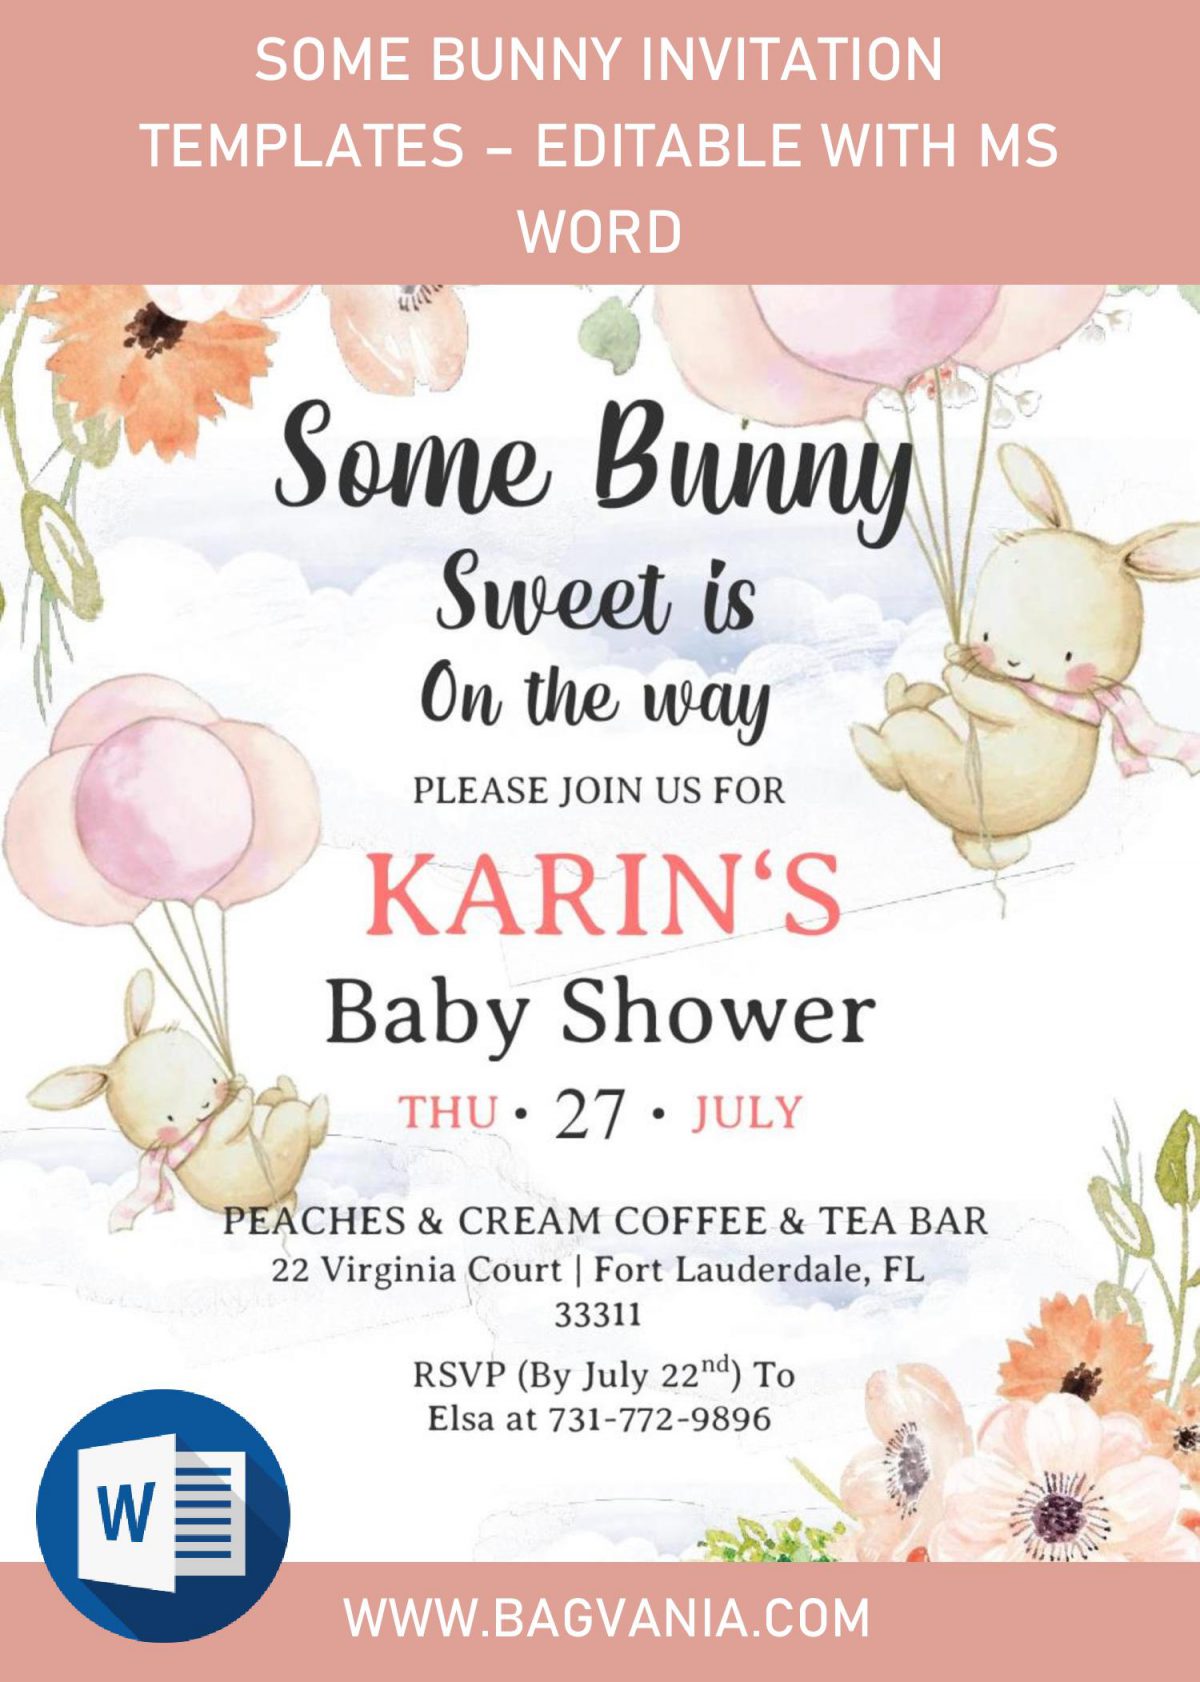 Some Bunny Invitation Templates - Editable With MS Word and has fluffy clouds